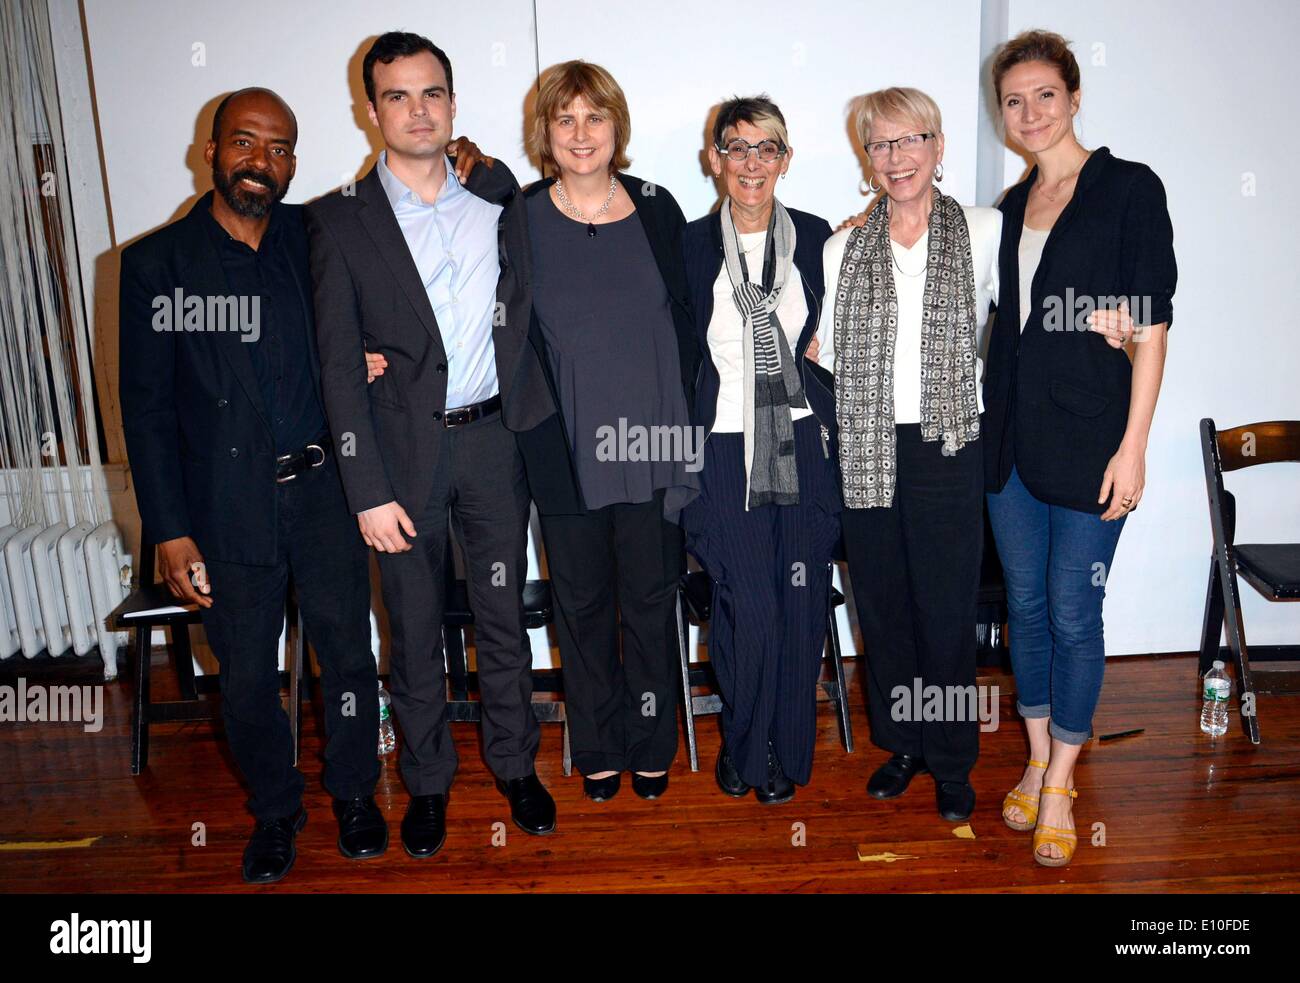 New York, NY, USA. 20th May, 2014. New York, USA. 20th May 2014. Brian Richardson, Stephen Plunkett, Ludovica Villar-Hauser, Marilyn Harris Kriegel, Karen Grassle, Kathleen Wise in attendance for Private Reading of New Play HARM'S WAY, Theater Lab, New York, NY May 20, 2014. Credit:  Derek Storm/Everett Collection/Alamy Live News/Alamy Live News Stock Photo